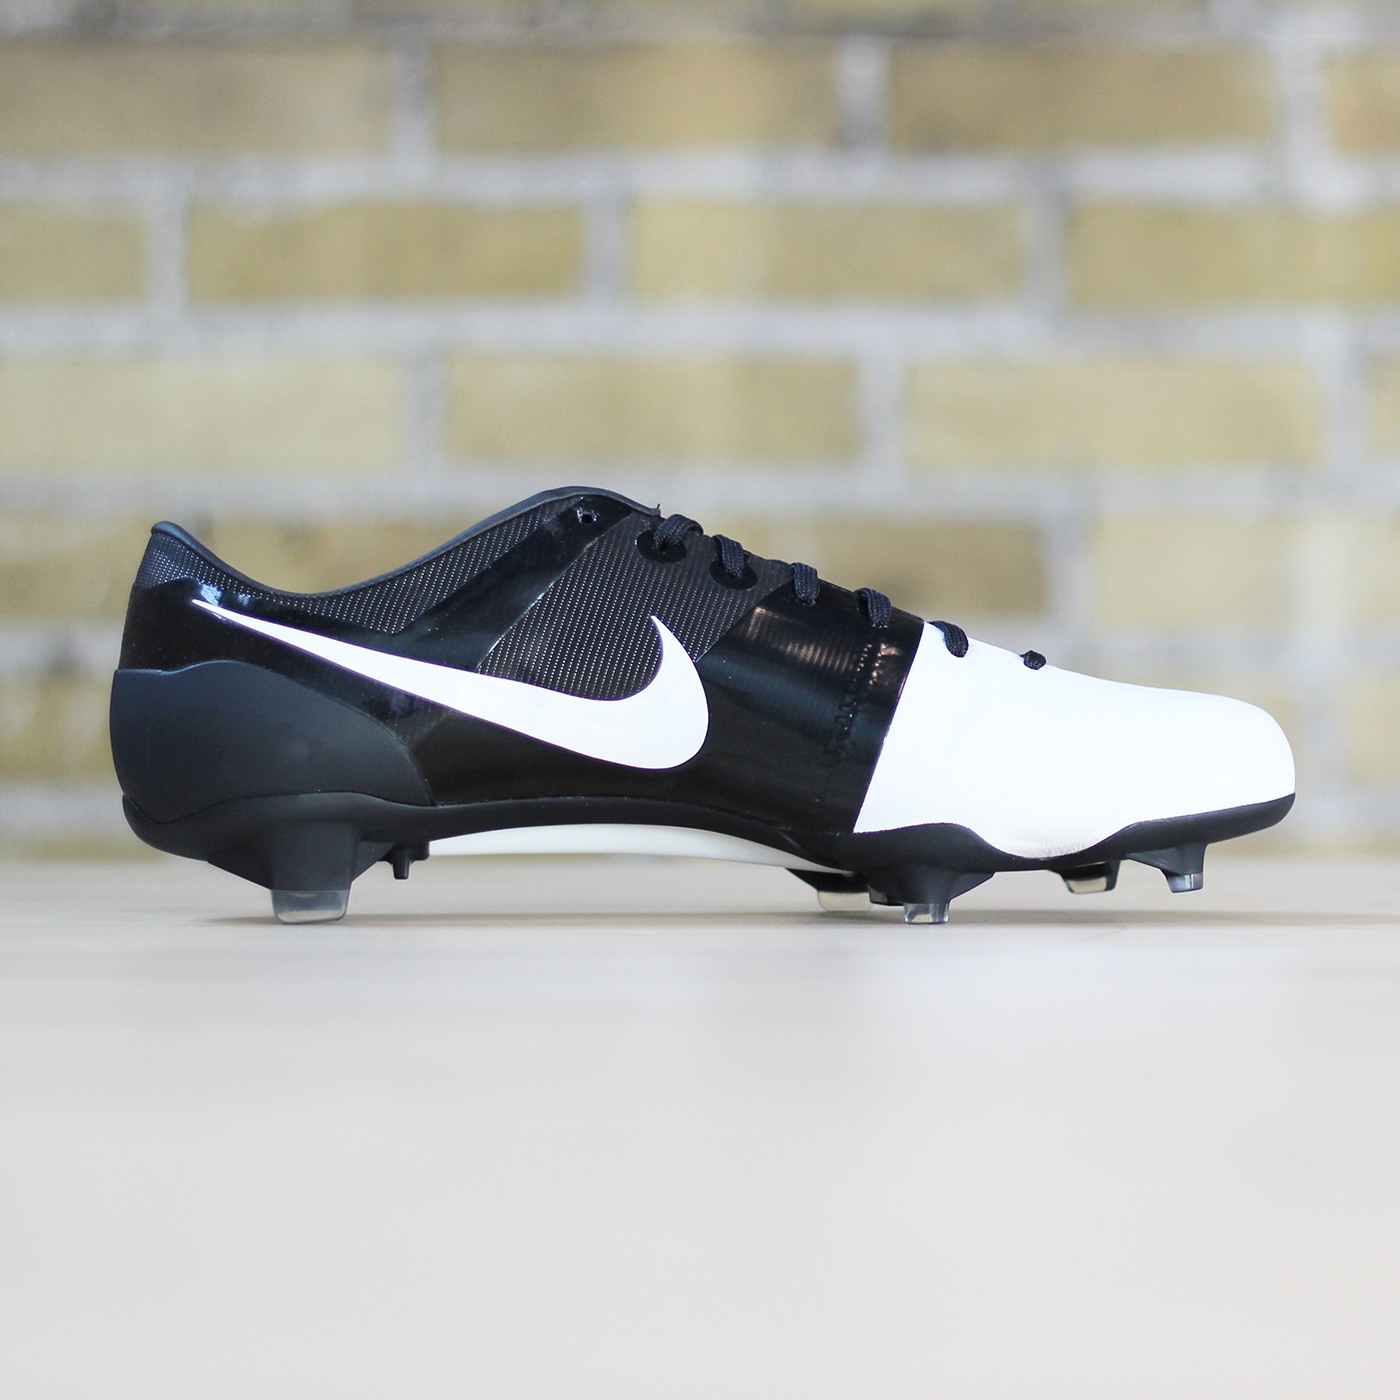 Nike Soccer Cleat